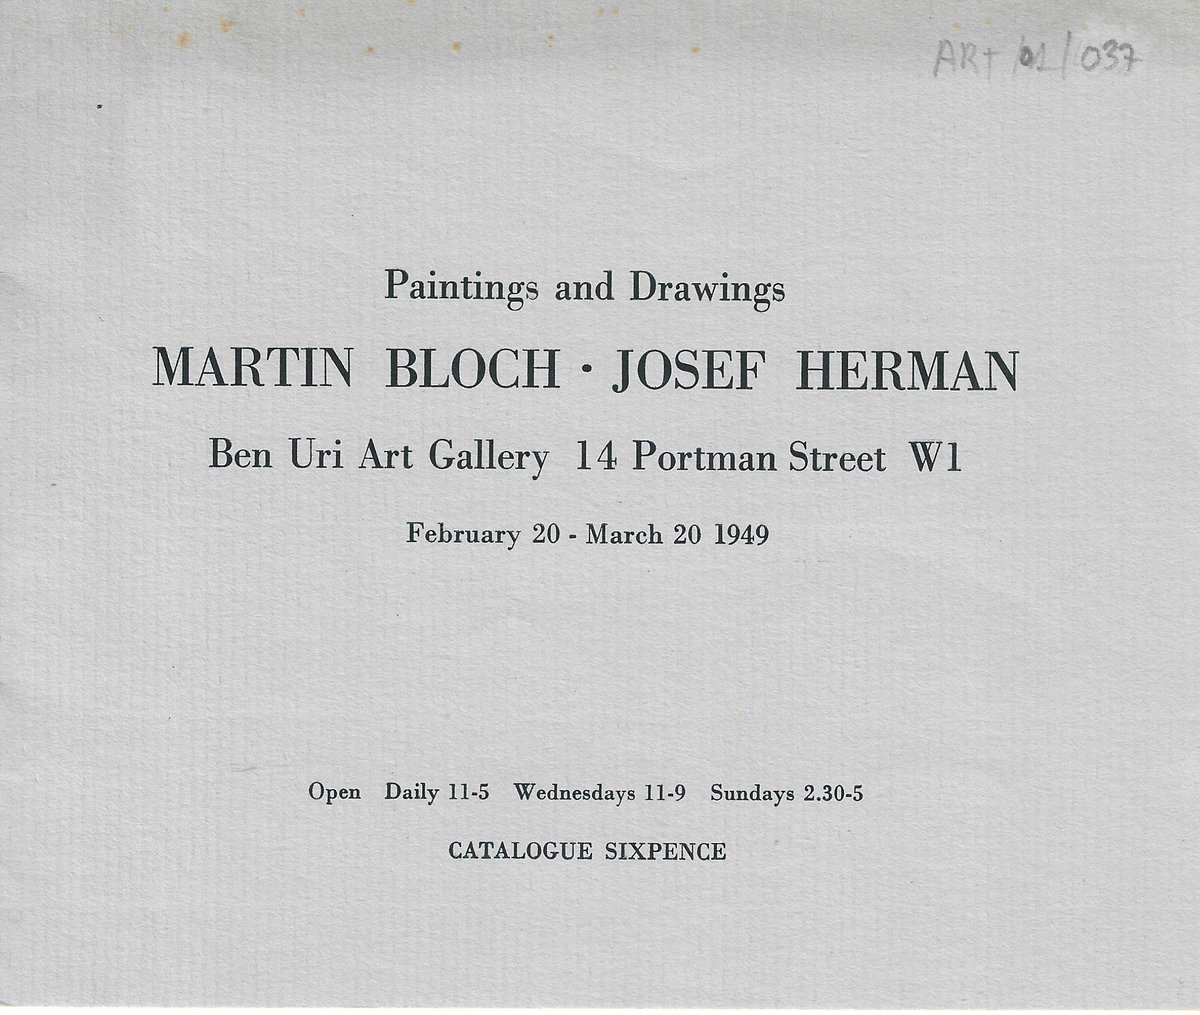 Find out more on the exhibition “Paintings and Drawings: Martin Bloch - Josef Herman” here: bit.ly/3BbmPJT #benuricollection #benurigallery